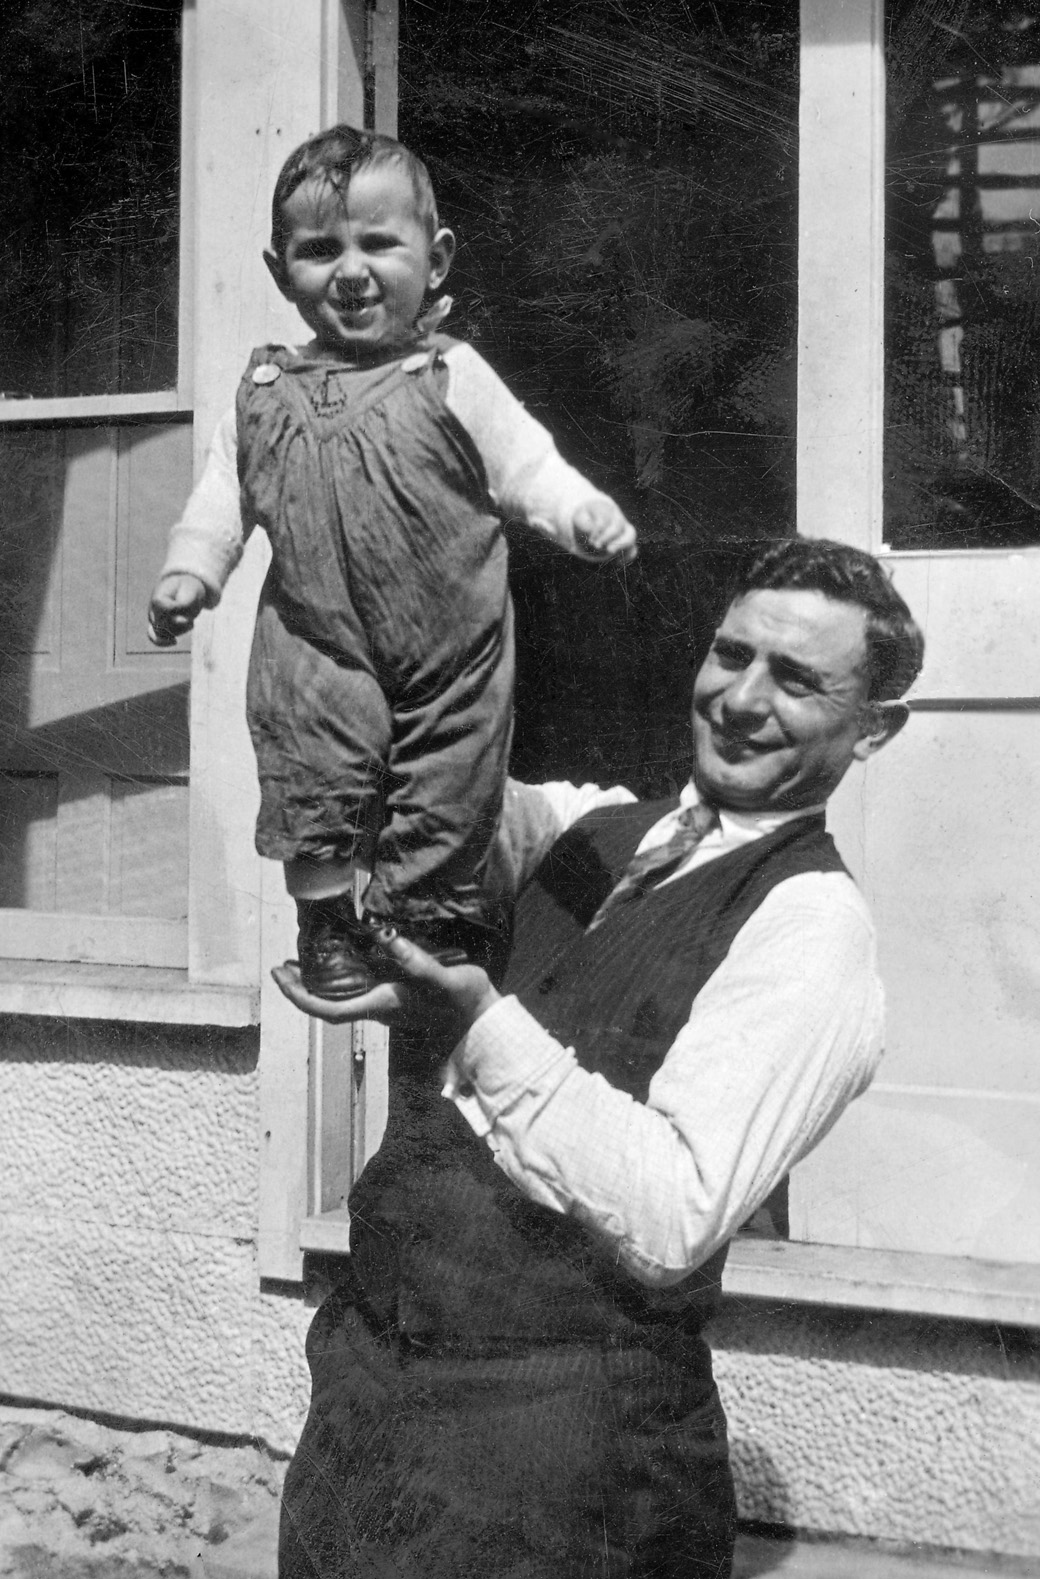 man and baby boy possibly Lyle Nelson